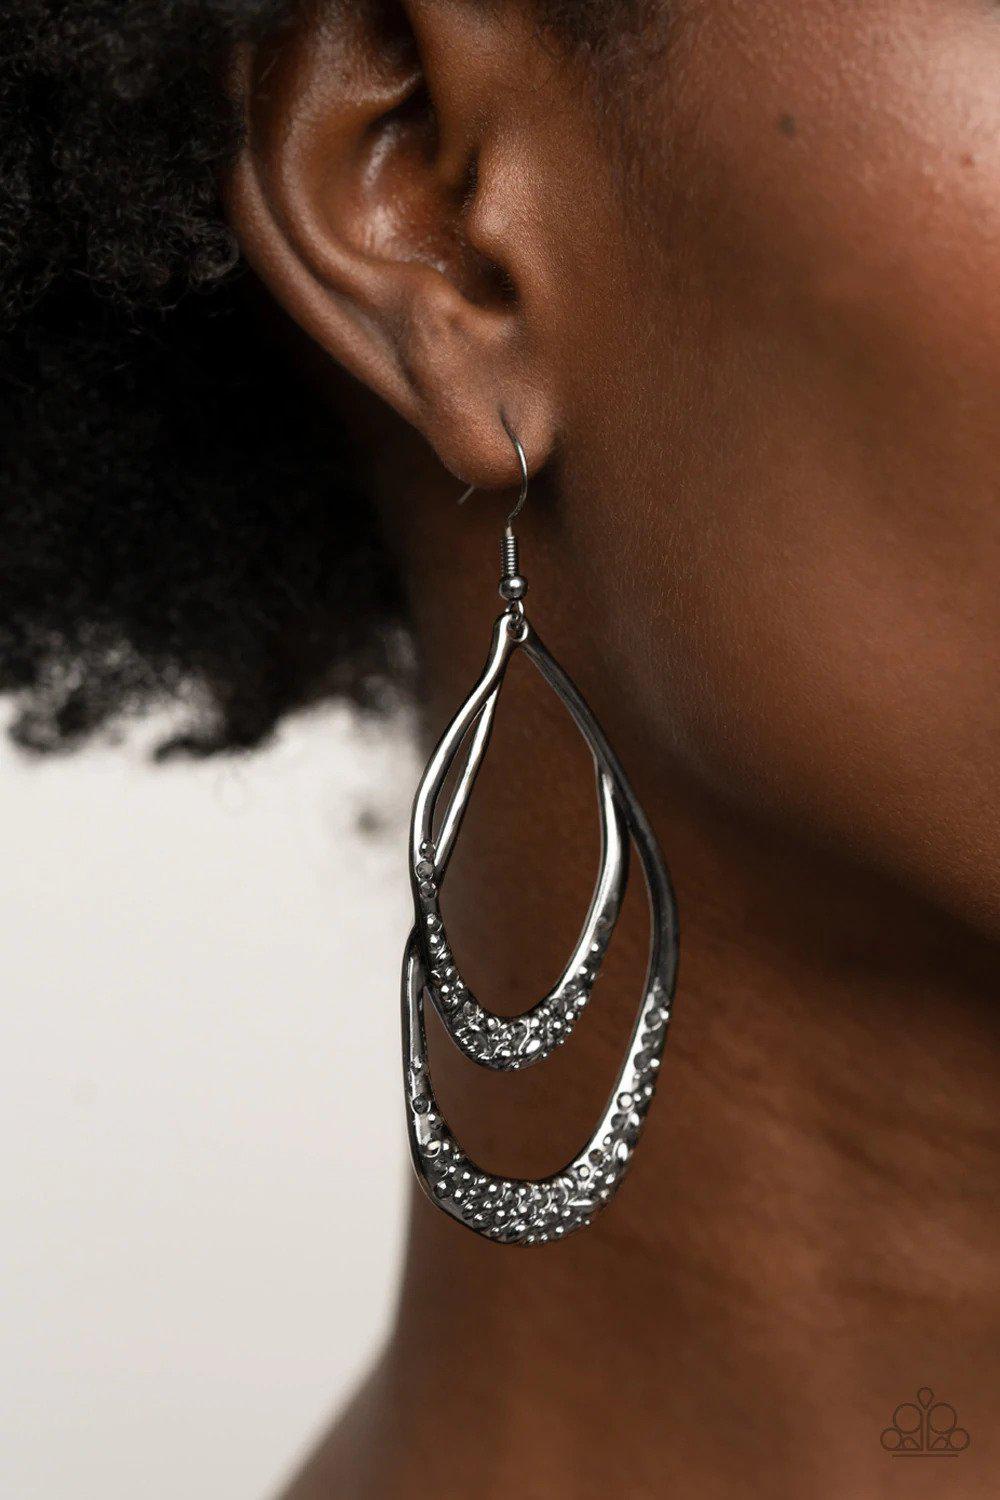 Beyond Your GLEAMS Black Earrings - Paparazzi Accessories- on model - CarasShop.com - $5 Jewelry by Cara Jewels